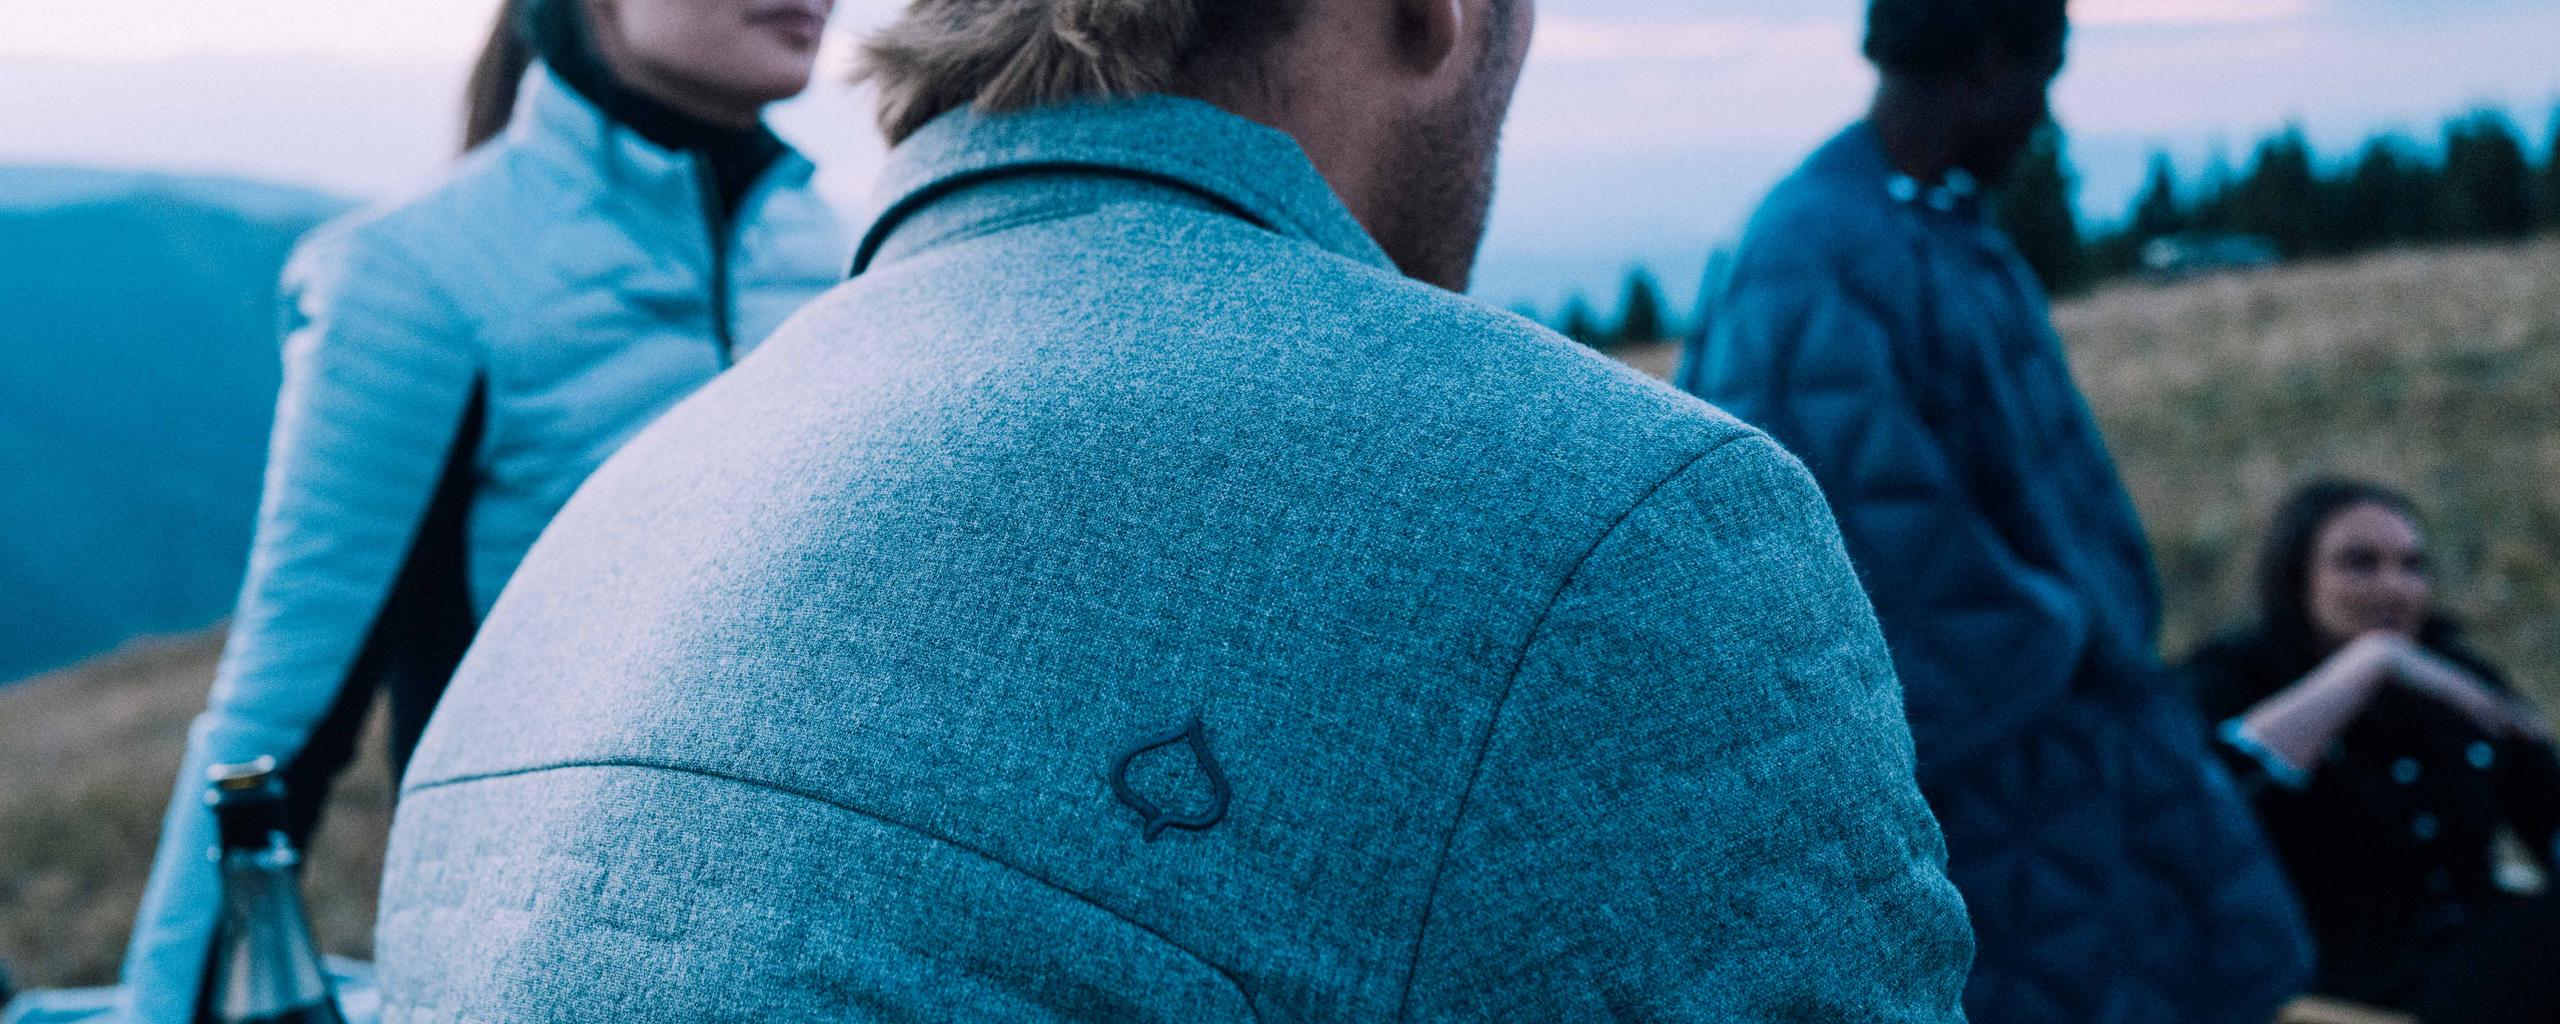 Closeup of man's shoulder with embroidered AspenX leaf logo on shirt with friends and campfire in the background